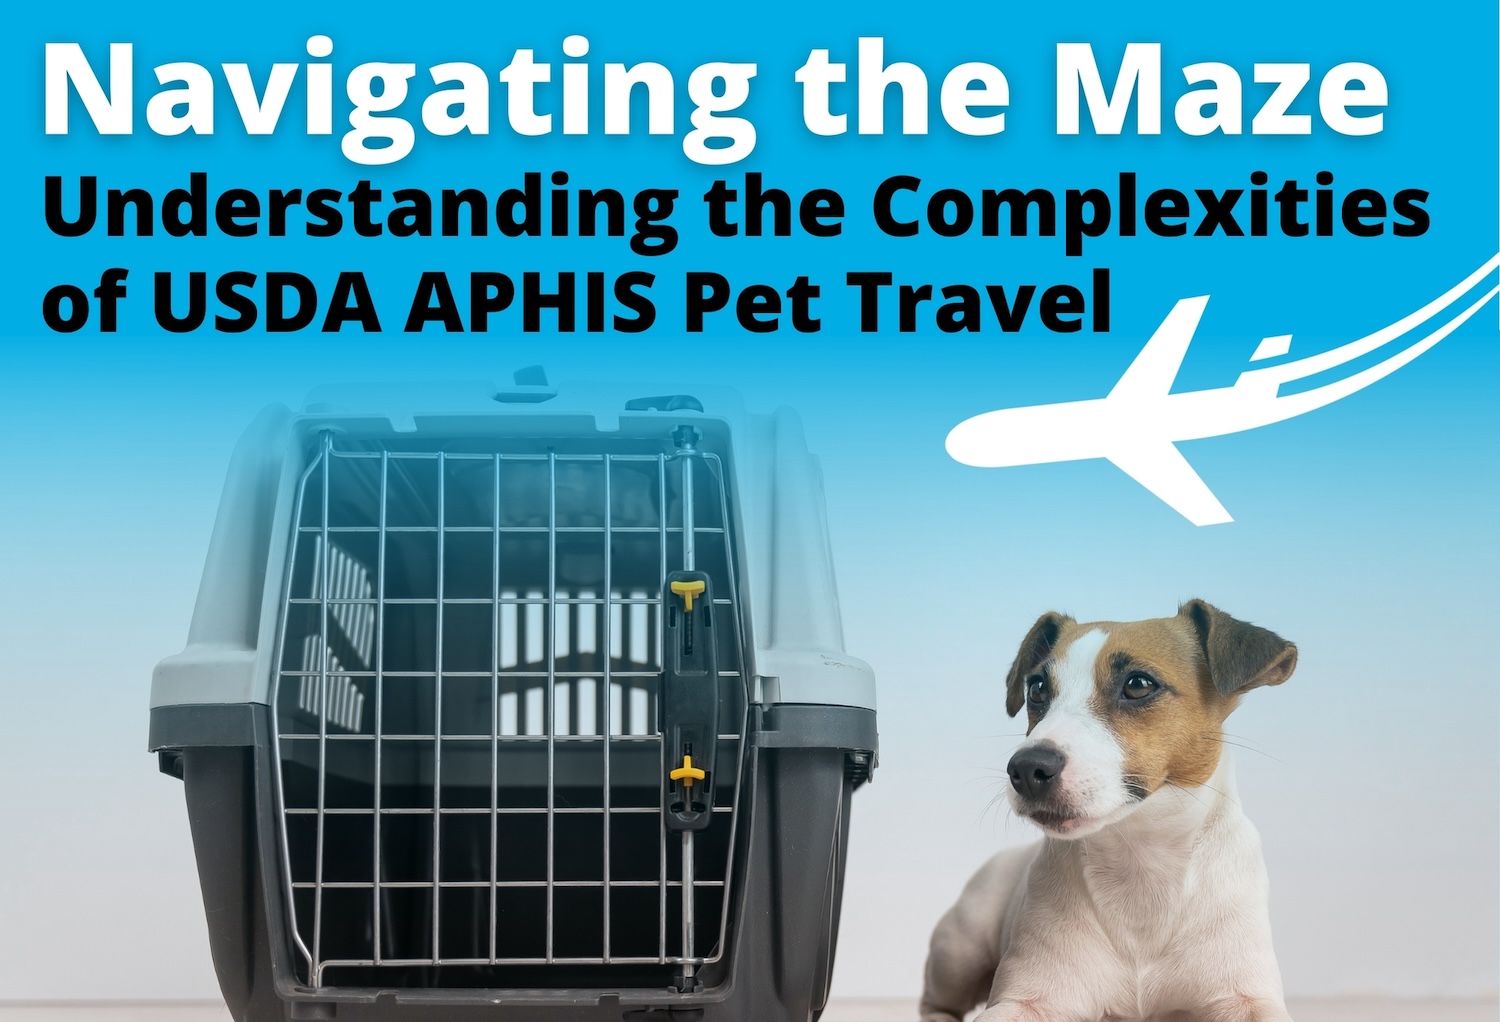 usda aphis pet travel to cayman islands